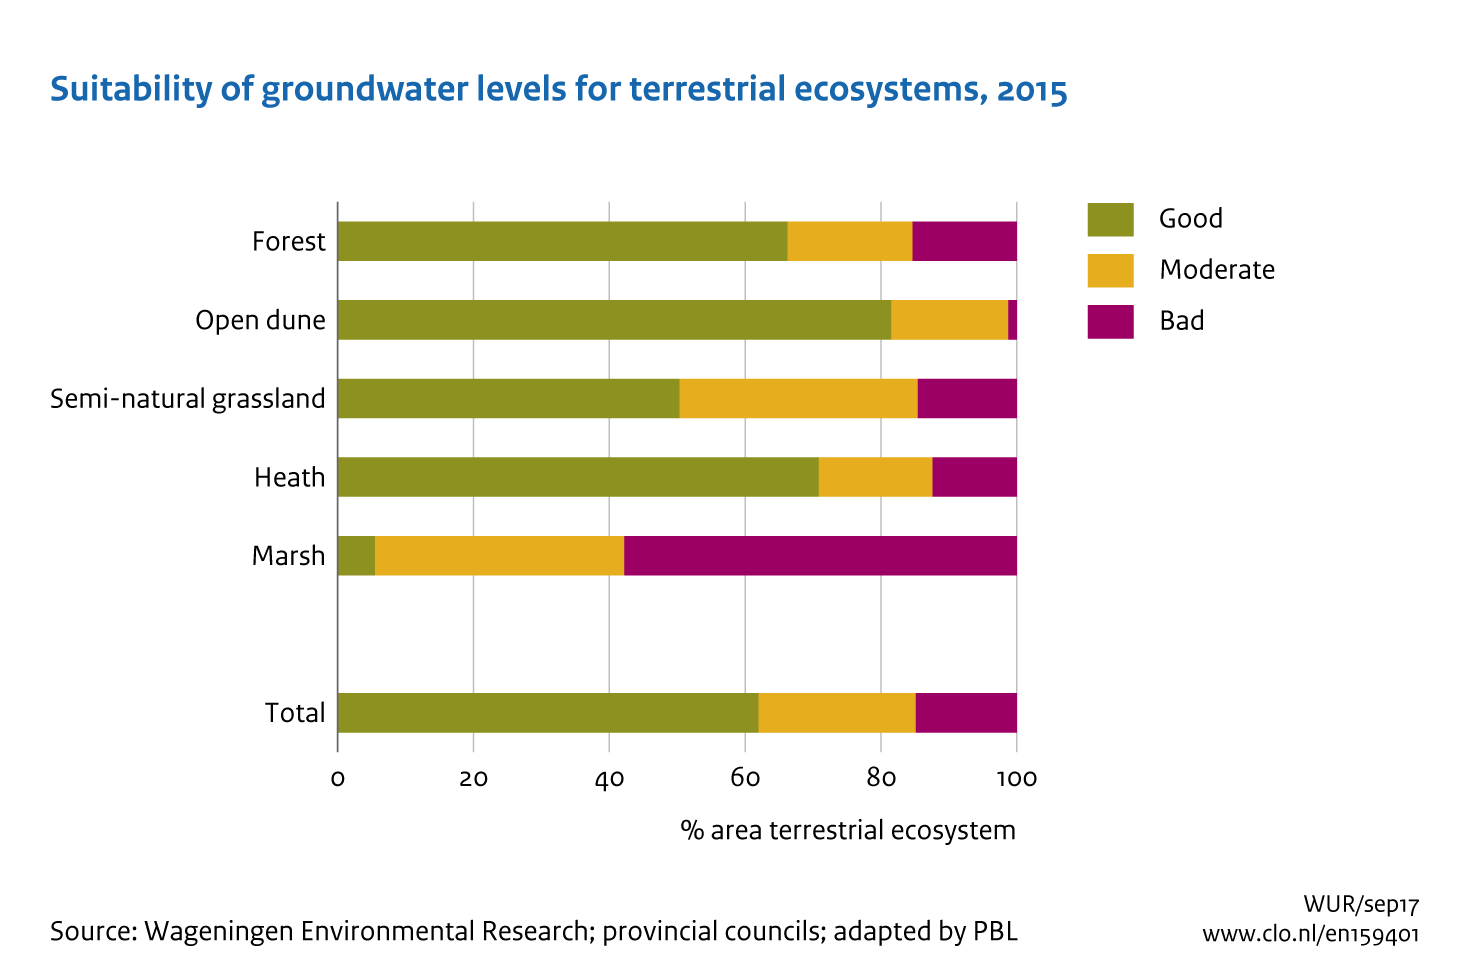 Image Suitability of groundwater levels for terrestrial ecosystems. The image is further explained in the text.